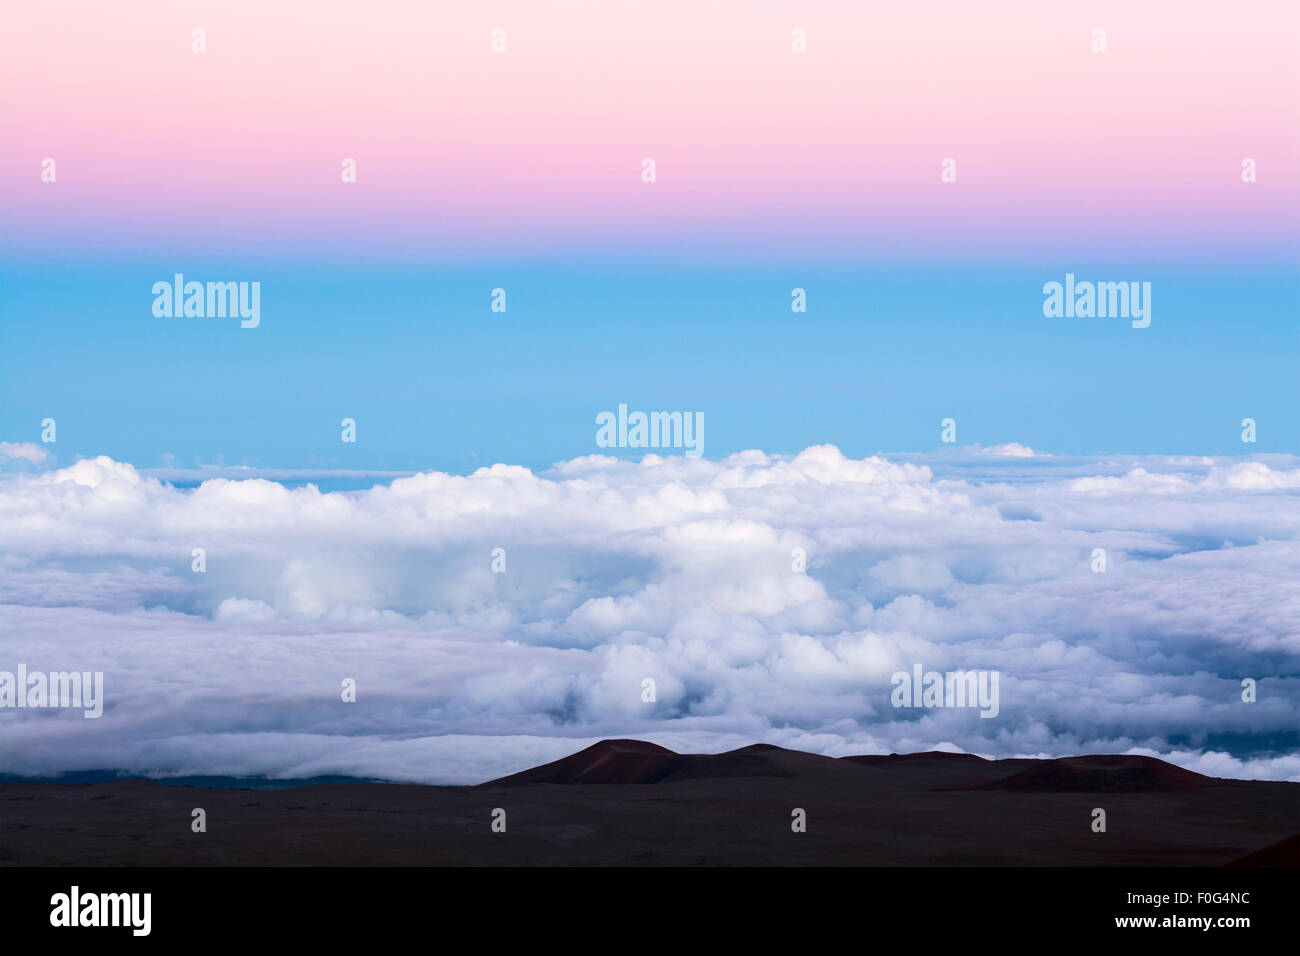 A classic pink inversion layer above a blue sky at 14,000 feet overlooking the top of the clouds. Stock Photo